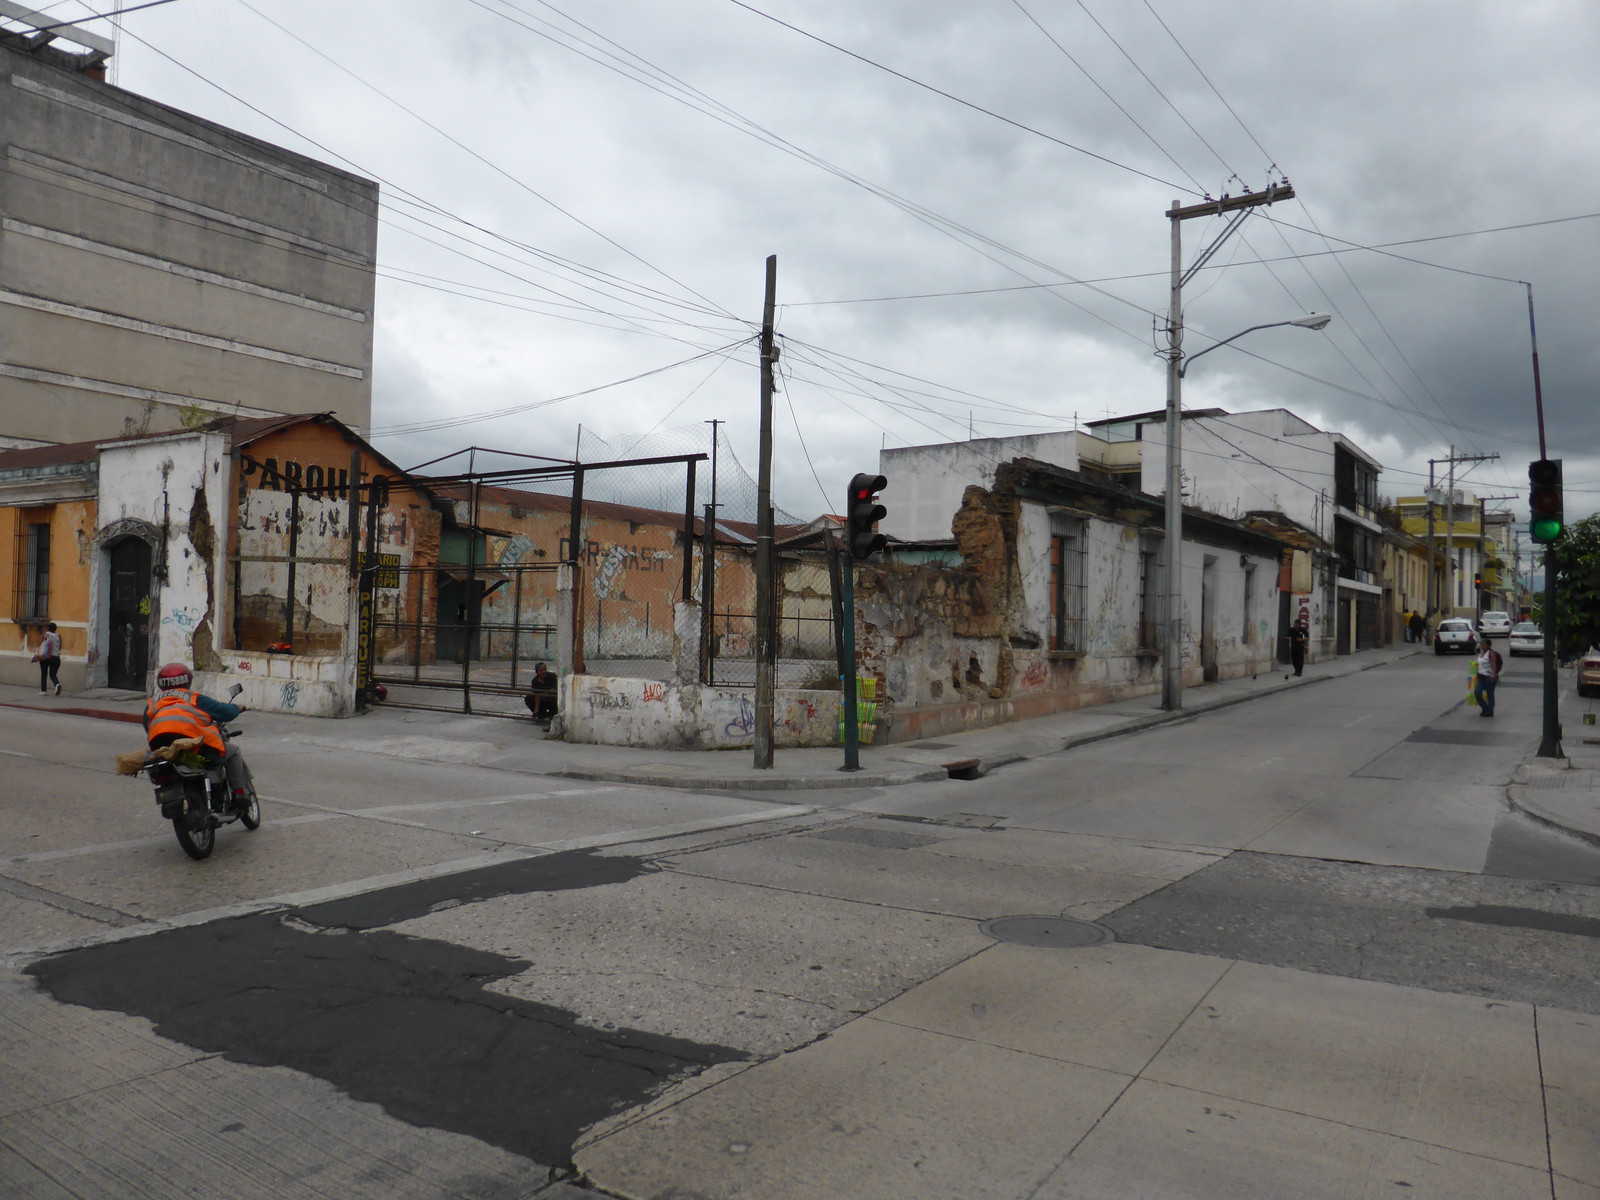 Off the main drag, Guatemala City's buildings are a bit rougher round the edges